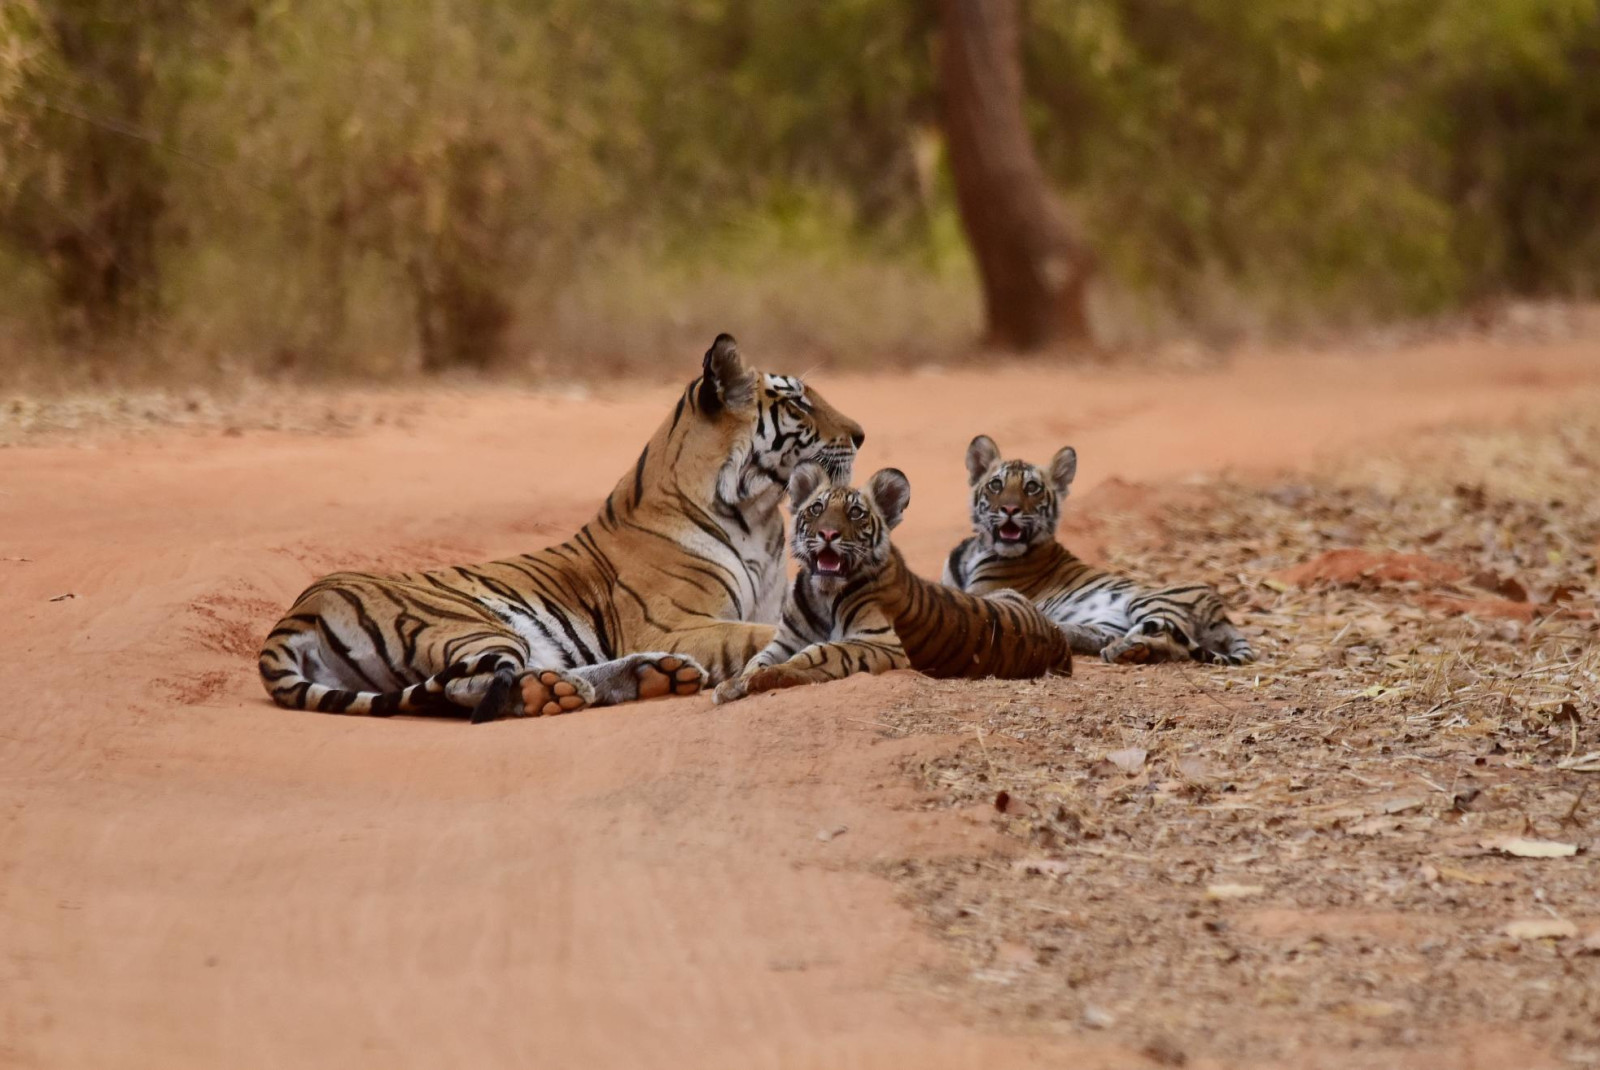 Tiger mom laying with her cubs in dirt trail of safari at Bandhavgarh National Park.